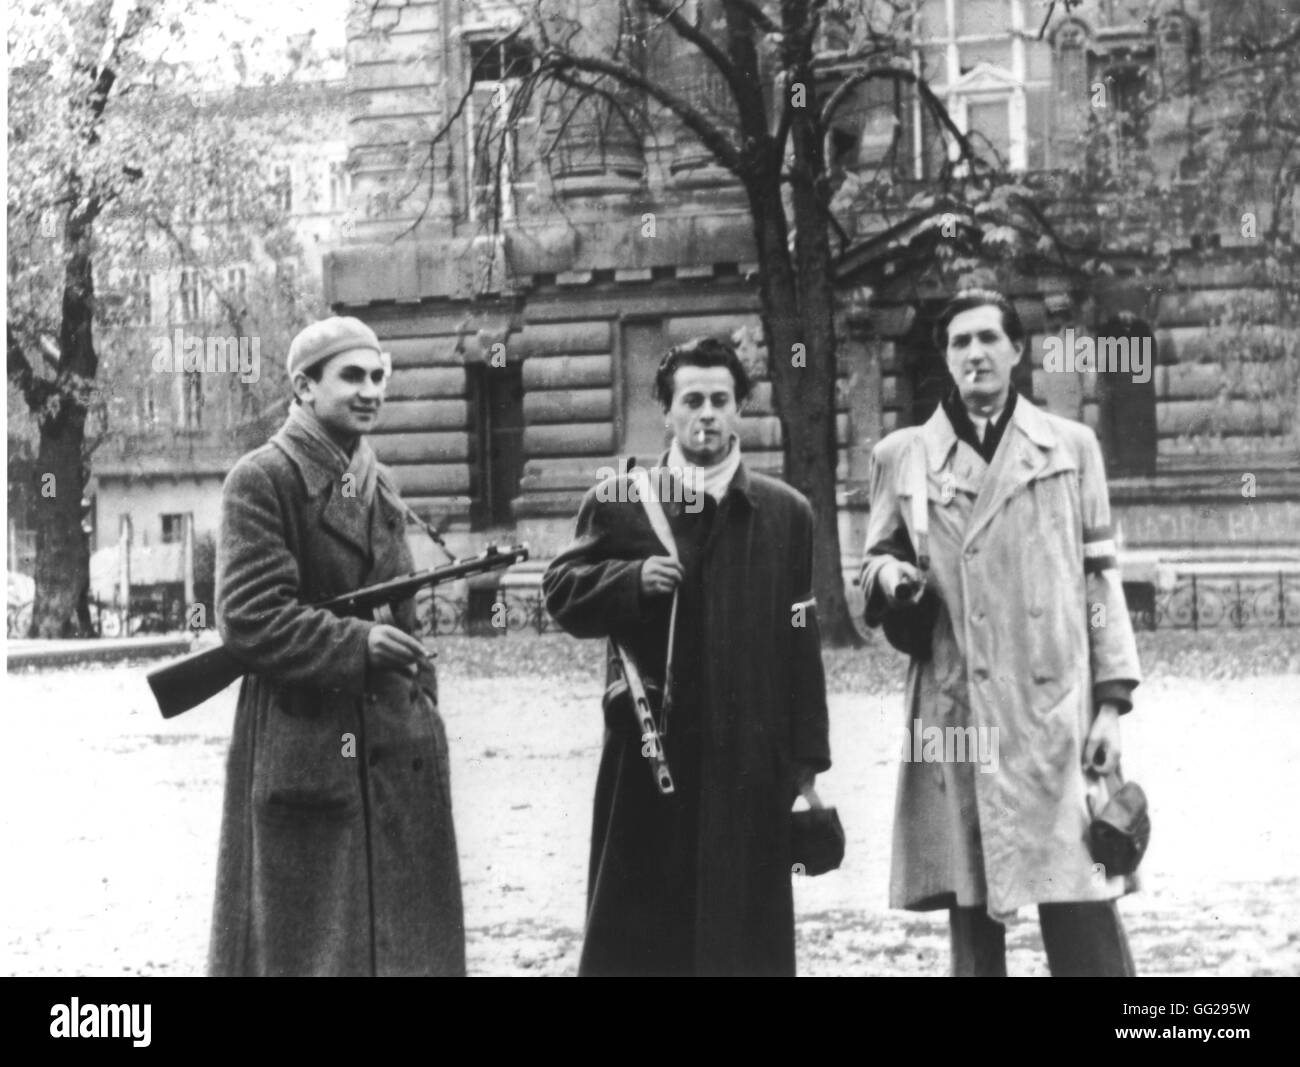 Budapest, armed students in front of the University. Their armbands have the colors of the Hungarian flag (red, white, green) 1956 Hungary - Hungarian uprising of 1956 National Archives - Washington Stock Photo